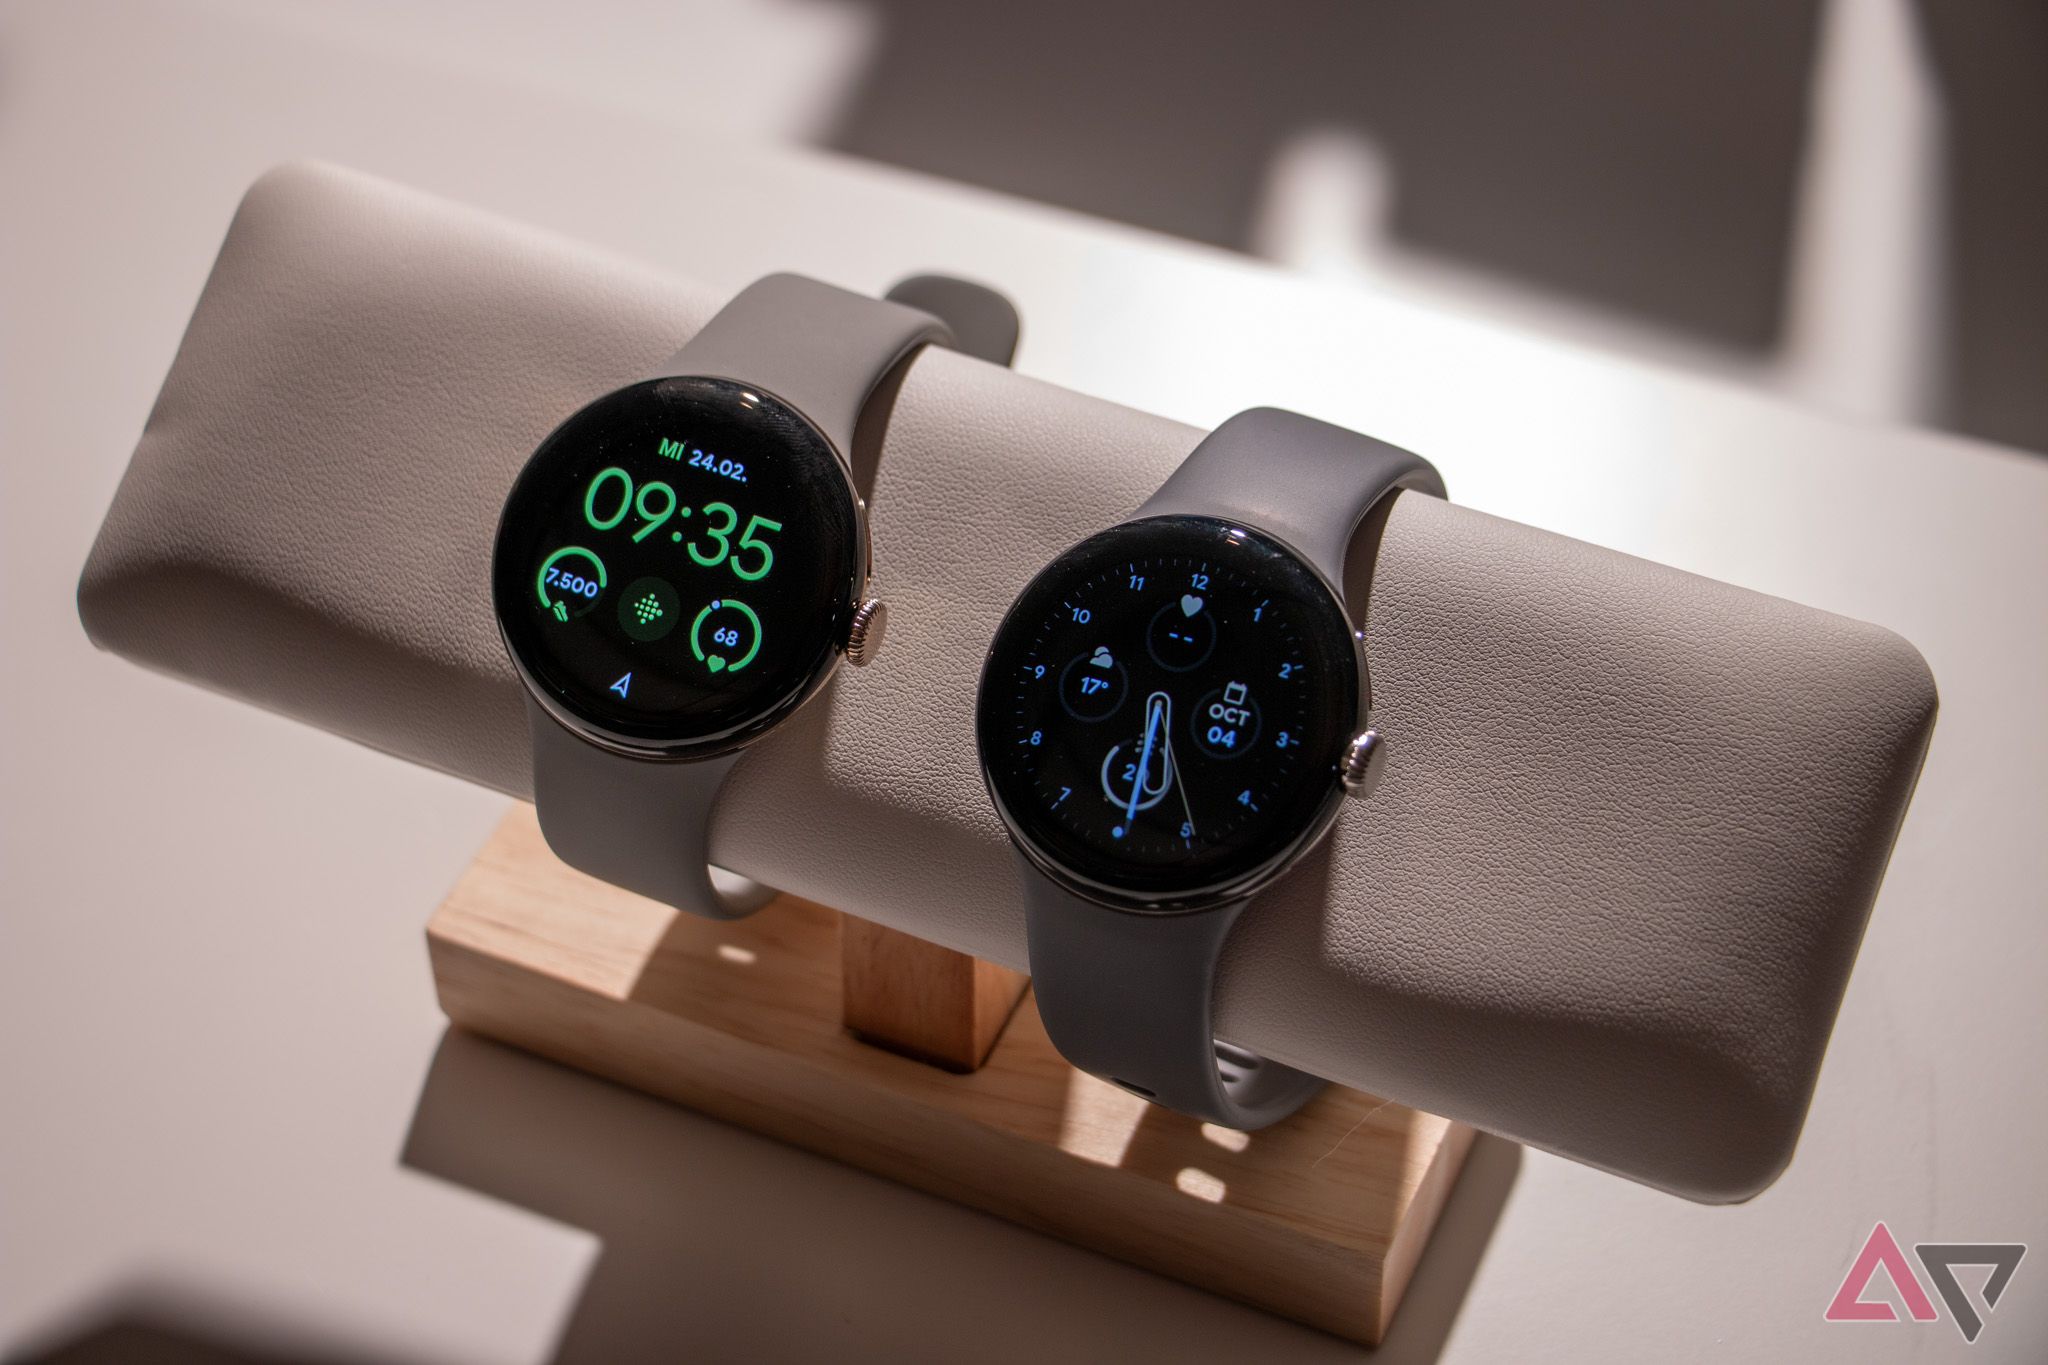 The Google Pixel Watch 2 next to the Google Pixel Watch 1 on a faux leather watch stand